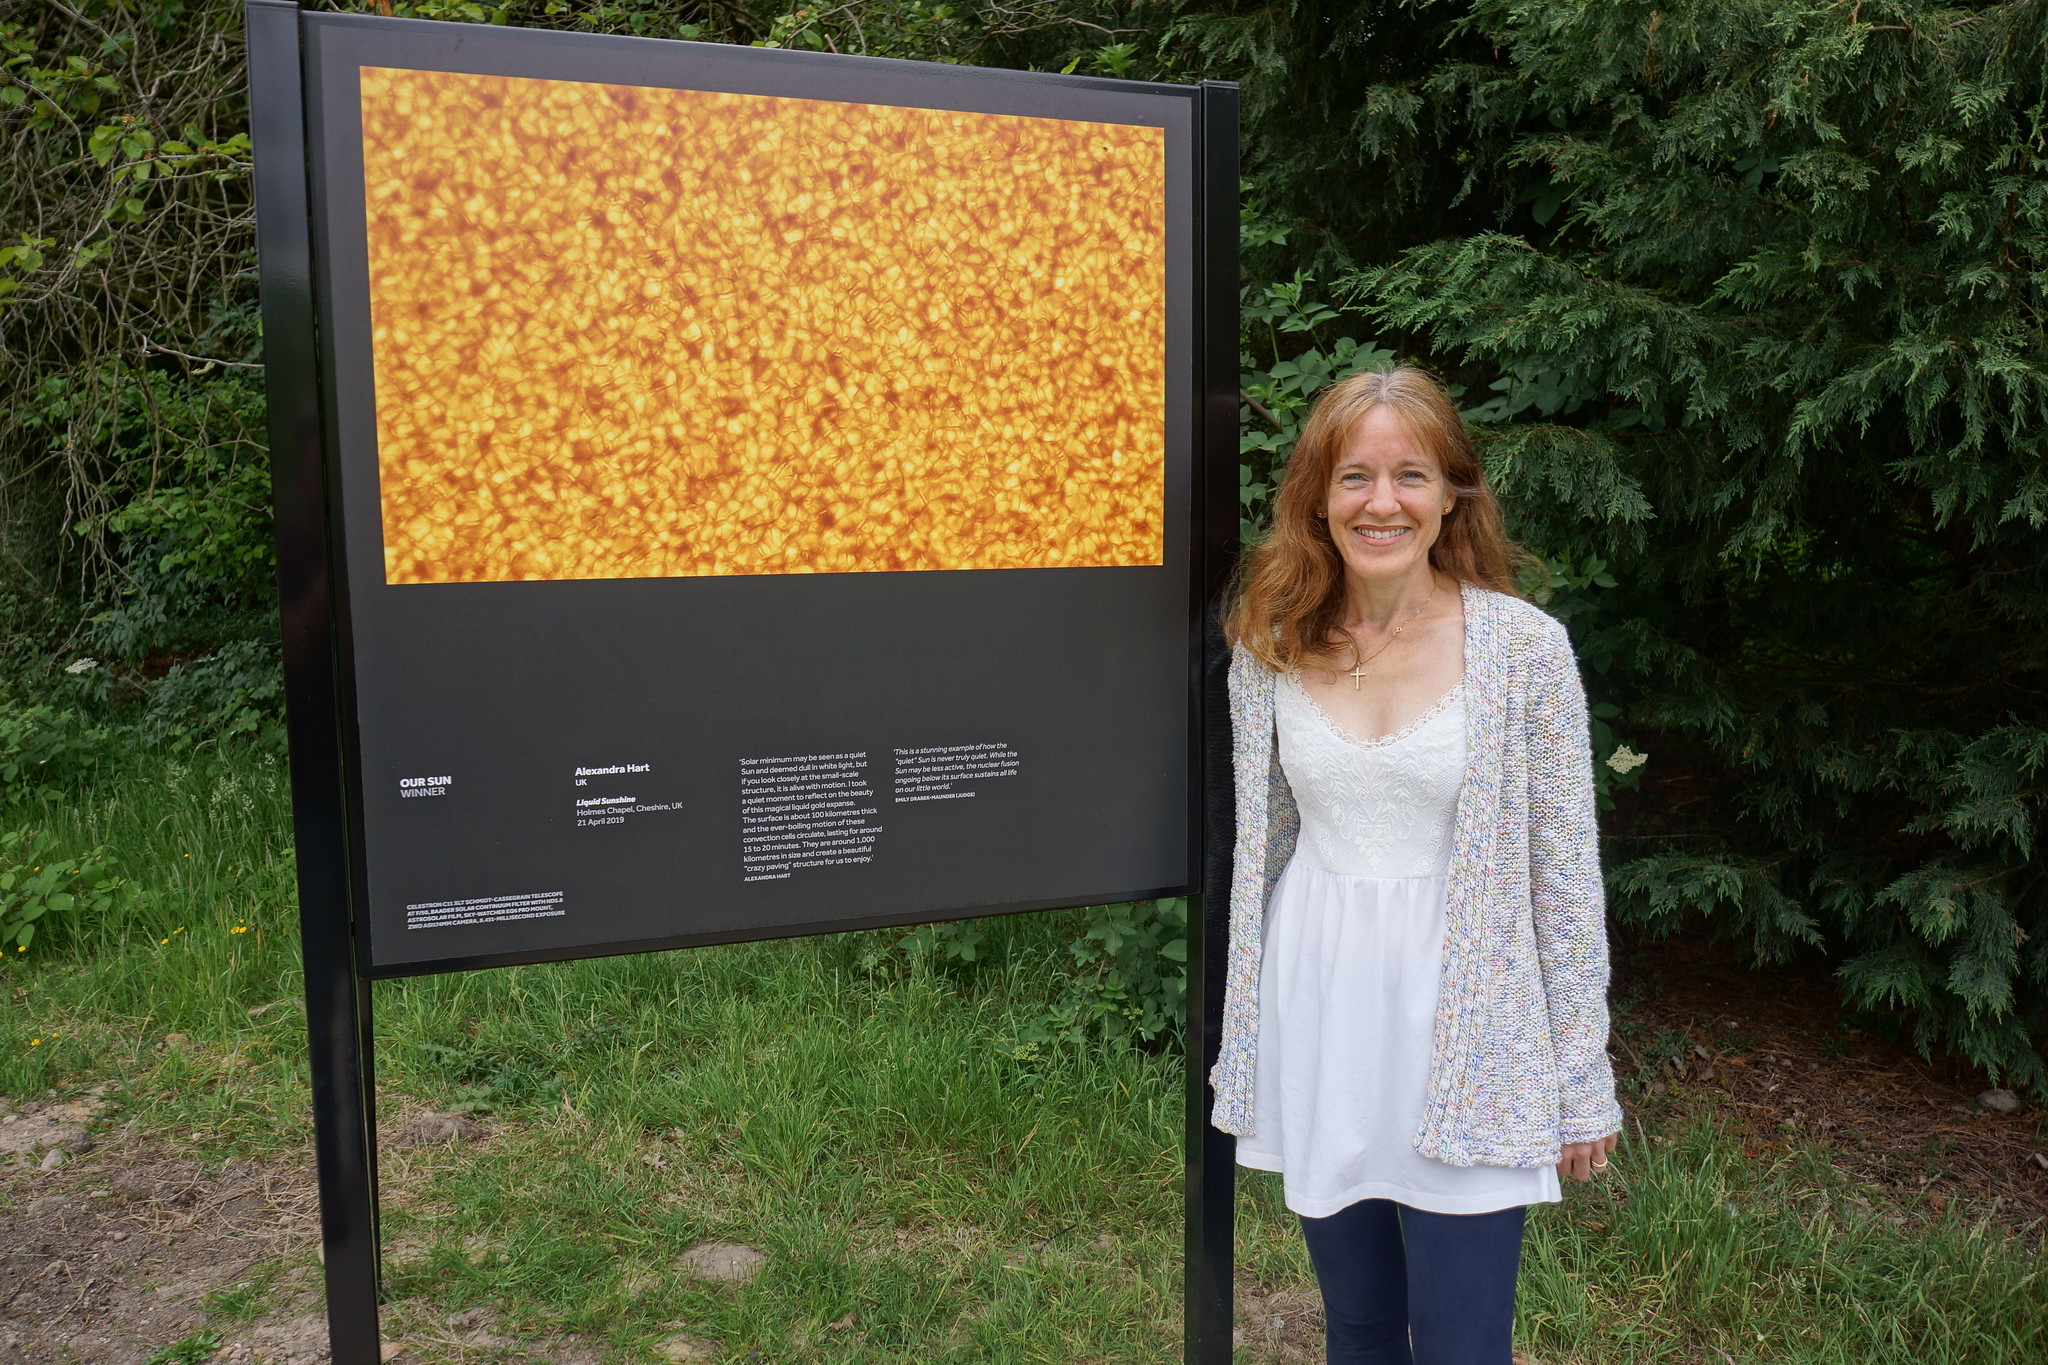 Royal Observatory Greenwichs Exhibition: Alexandra Hart with her exhibition image at Jodrell Bank.